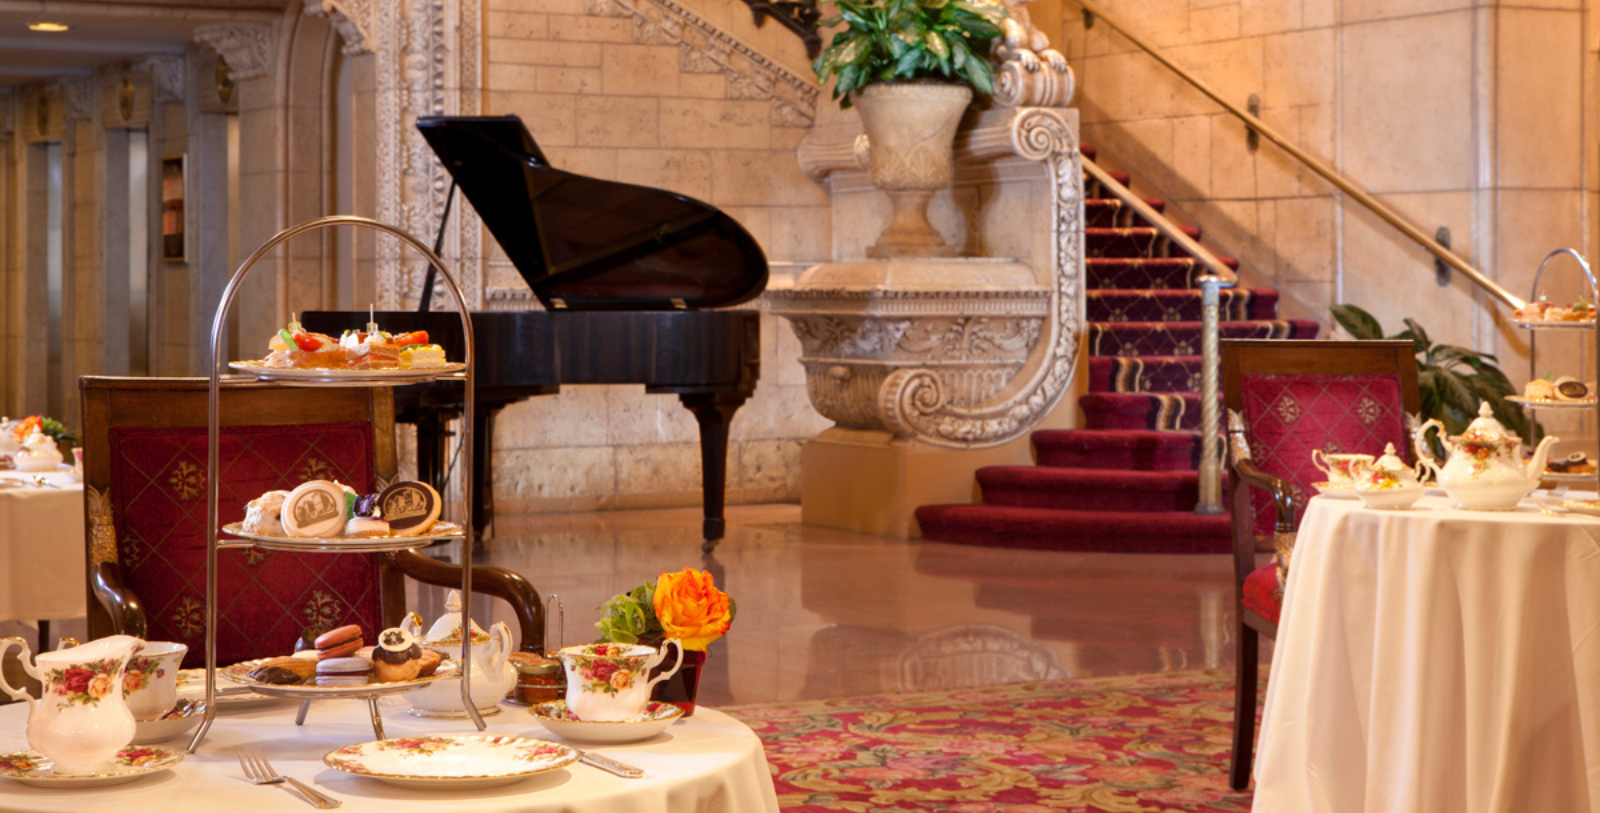 Taste the rich culinary heritage of The Biltmore Los Angeles during afternoon tea in the resplendent Rendezvous Court.